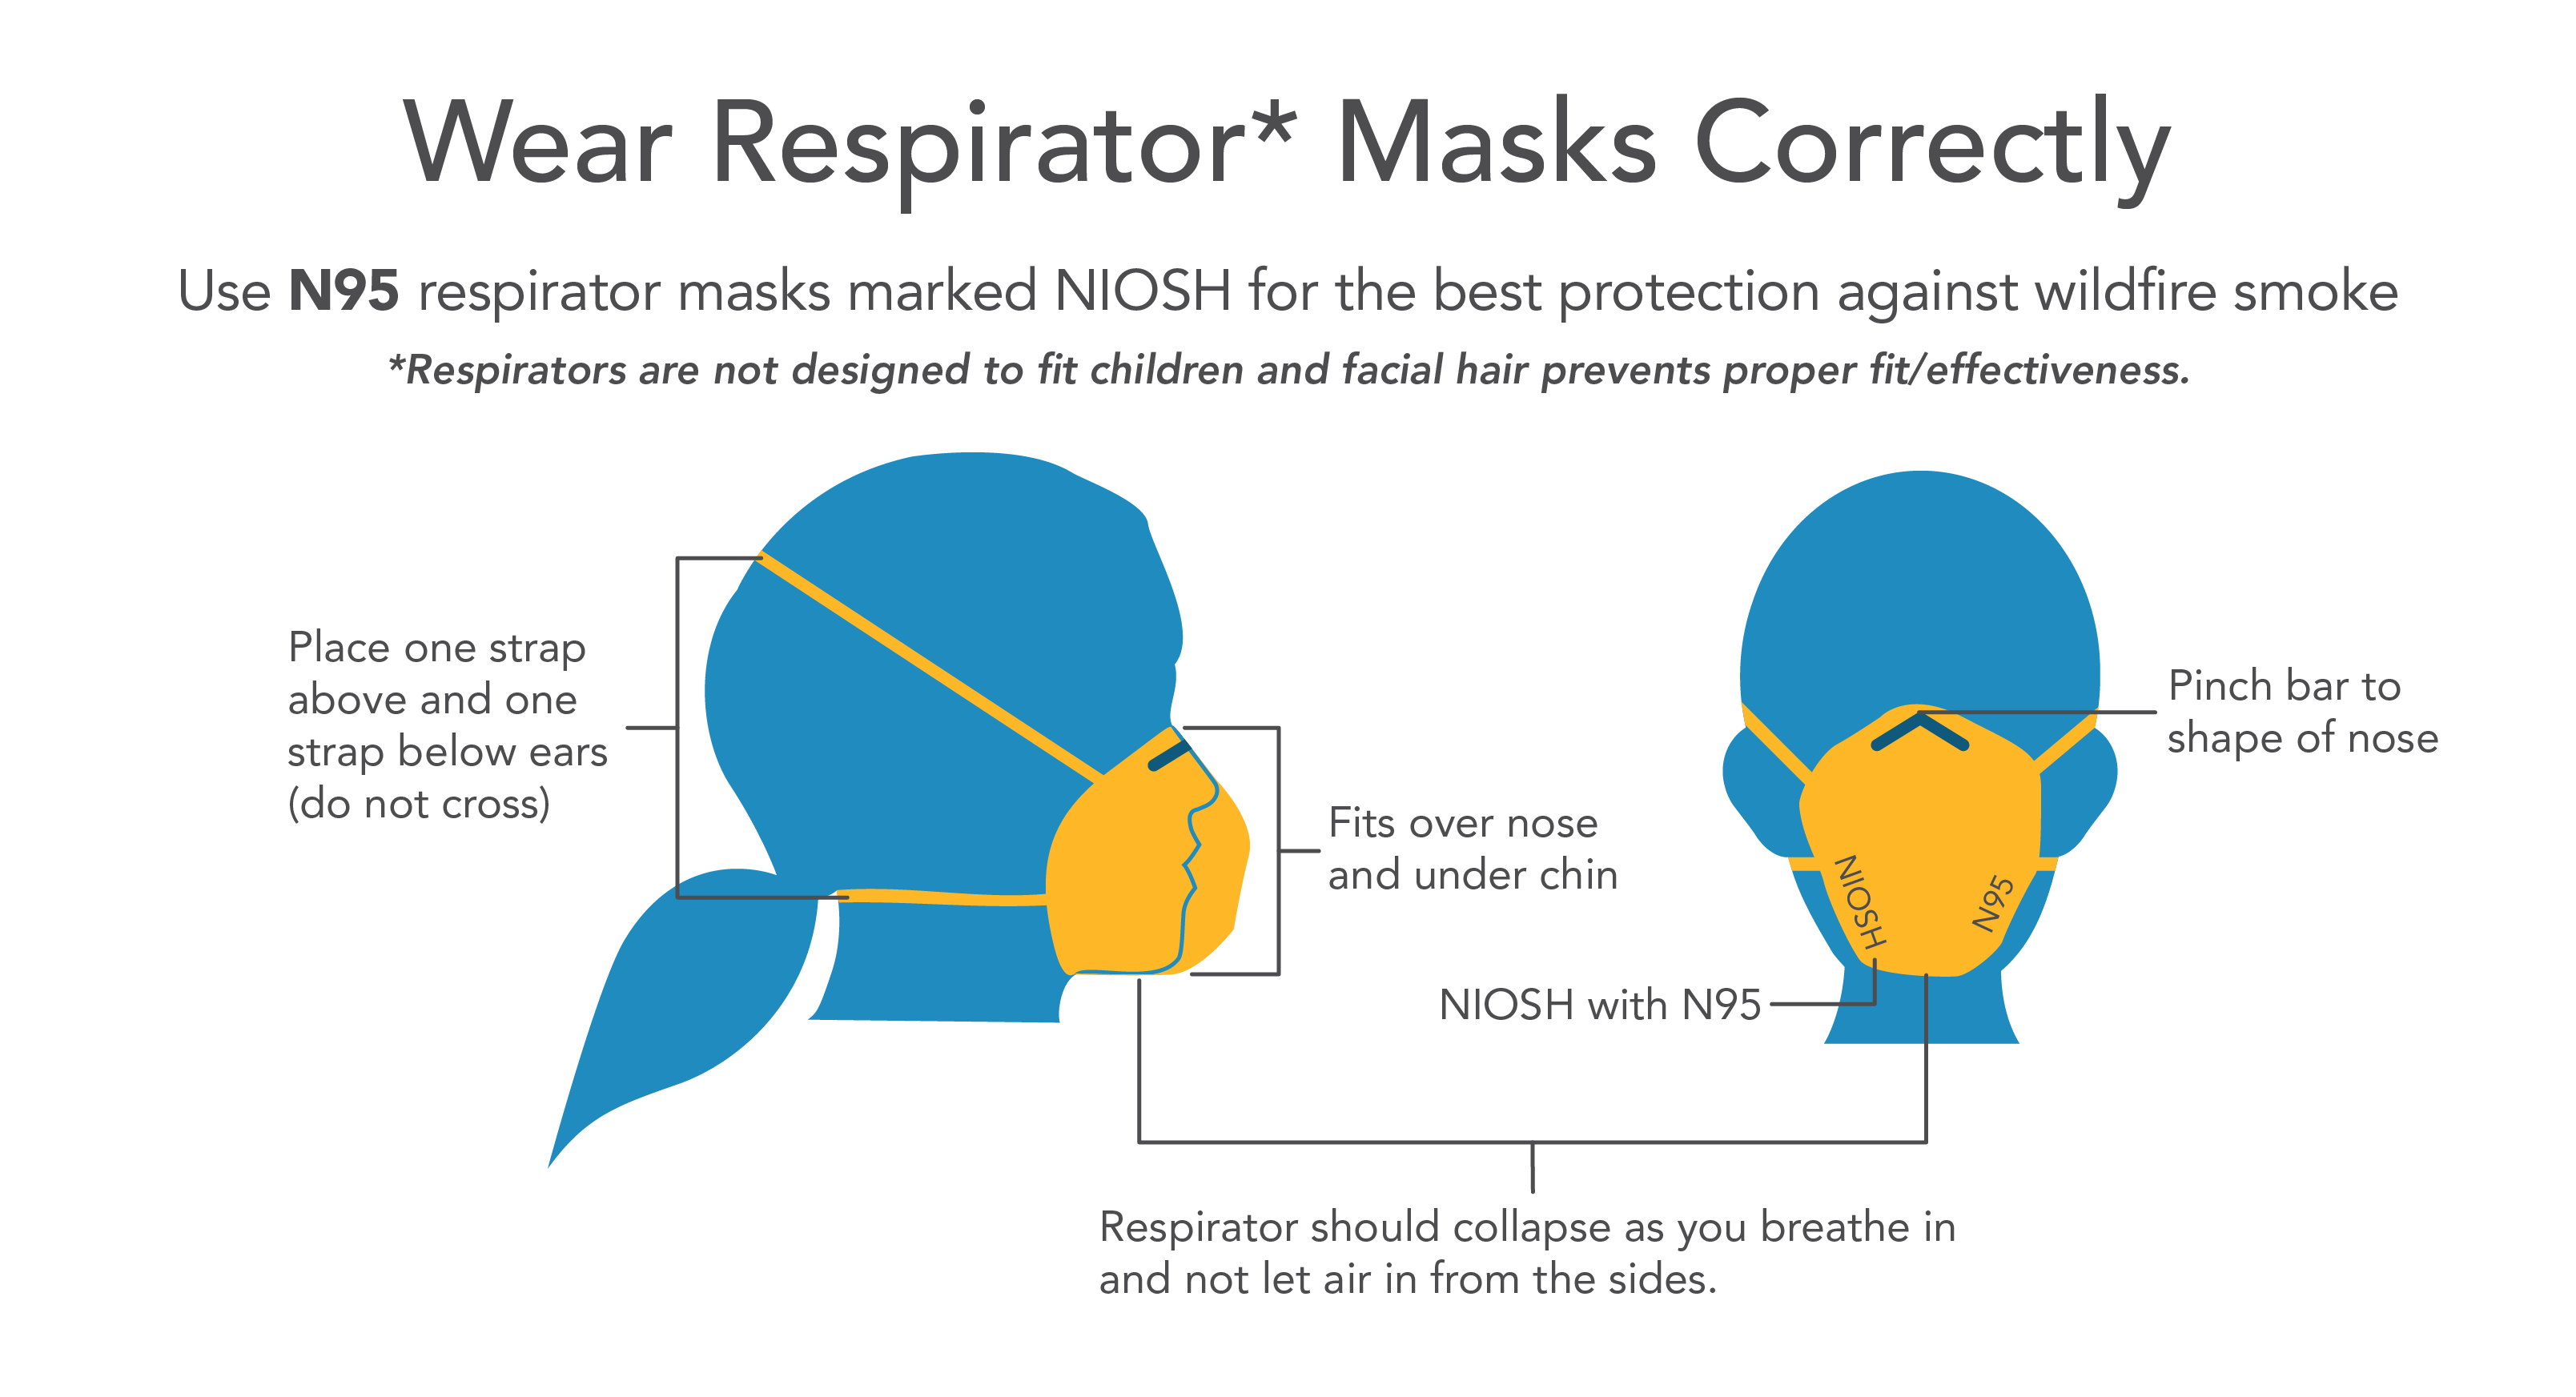 Wear Respirator Masks Correctly  Use an N95 respirator masks marked NIOSH for the best protection against wildfire smoke.  Place one strap above and one strap below ears (do not cross). Pinch bar to shape of nose. Fits over nose and under chin. NIOSH with N95. Respirator should collapse as you breathe in and not let air in from the sides.  Respirators are not designed to fit children and facial hair prevents proper fit/effectiveness.  